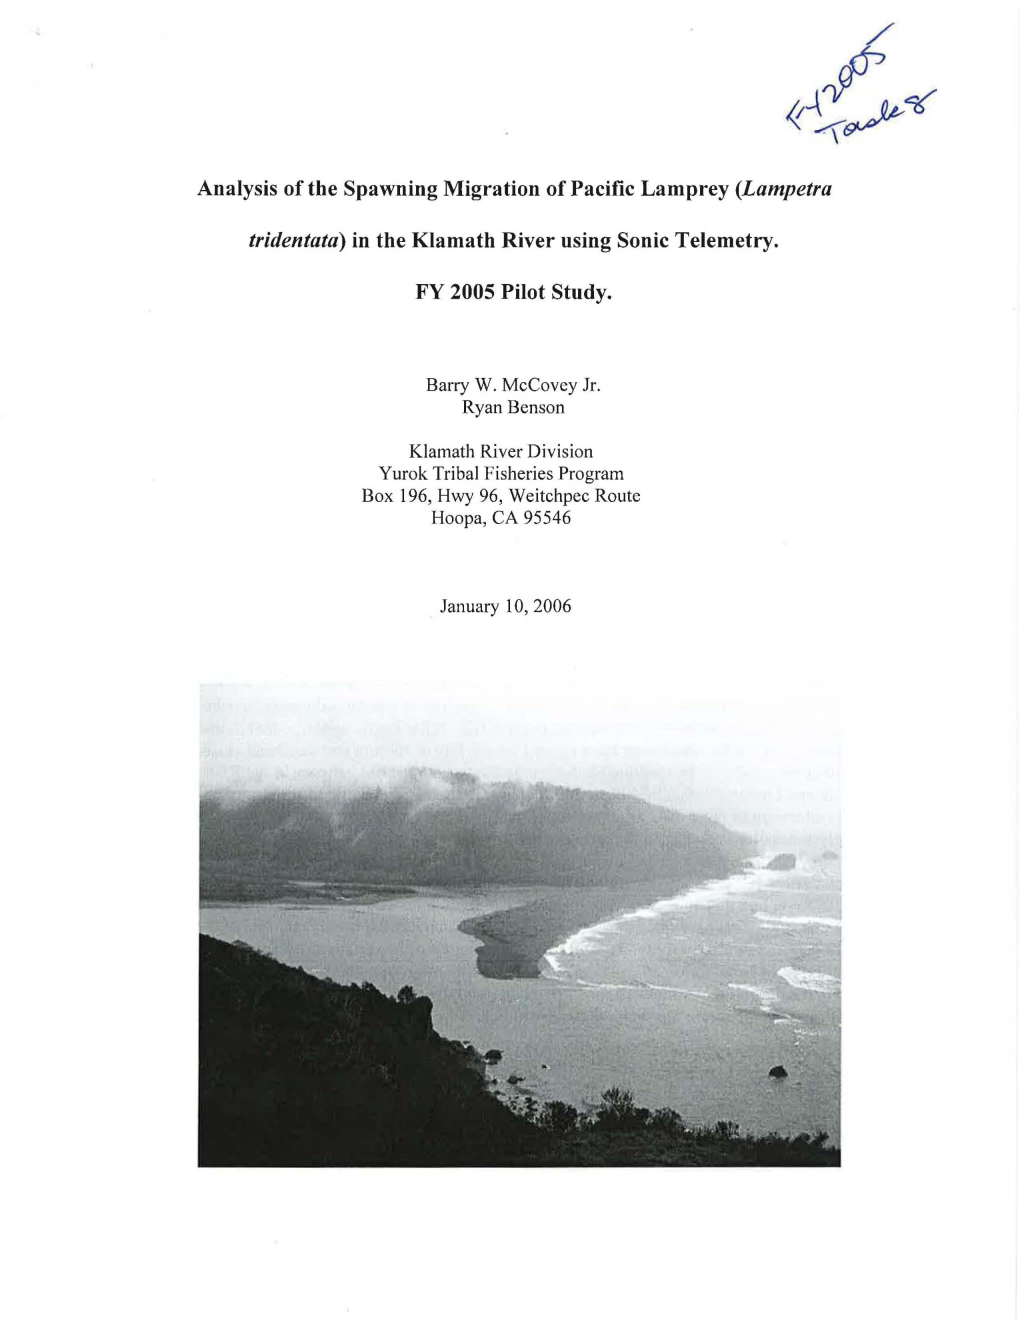 Analysis of the Spawning Migration of Pacific Lamprey (Lampetra Tridentata)